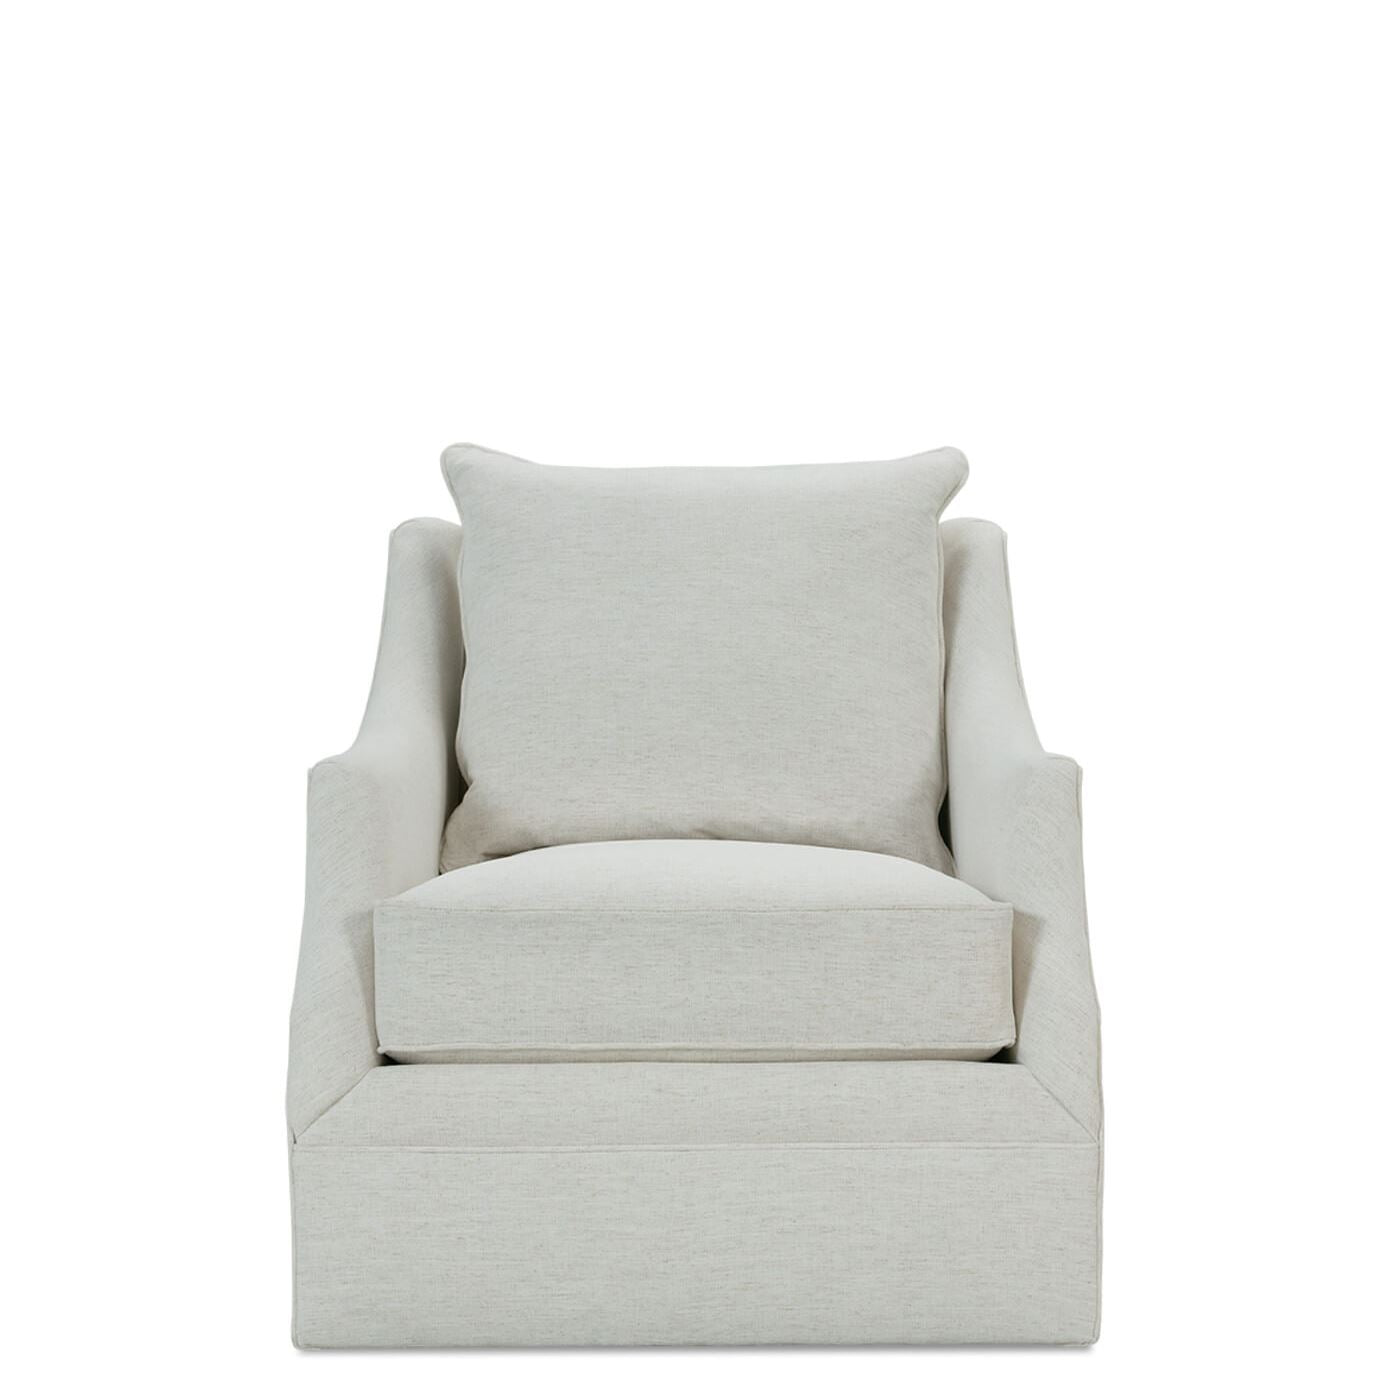 Kerrie Swivel Chair in Nomad Snow by Huck & Peck SWIVEL GLIDER Huck and Peck